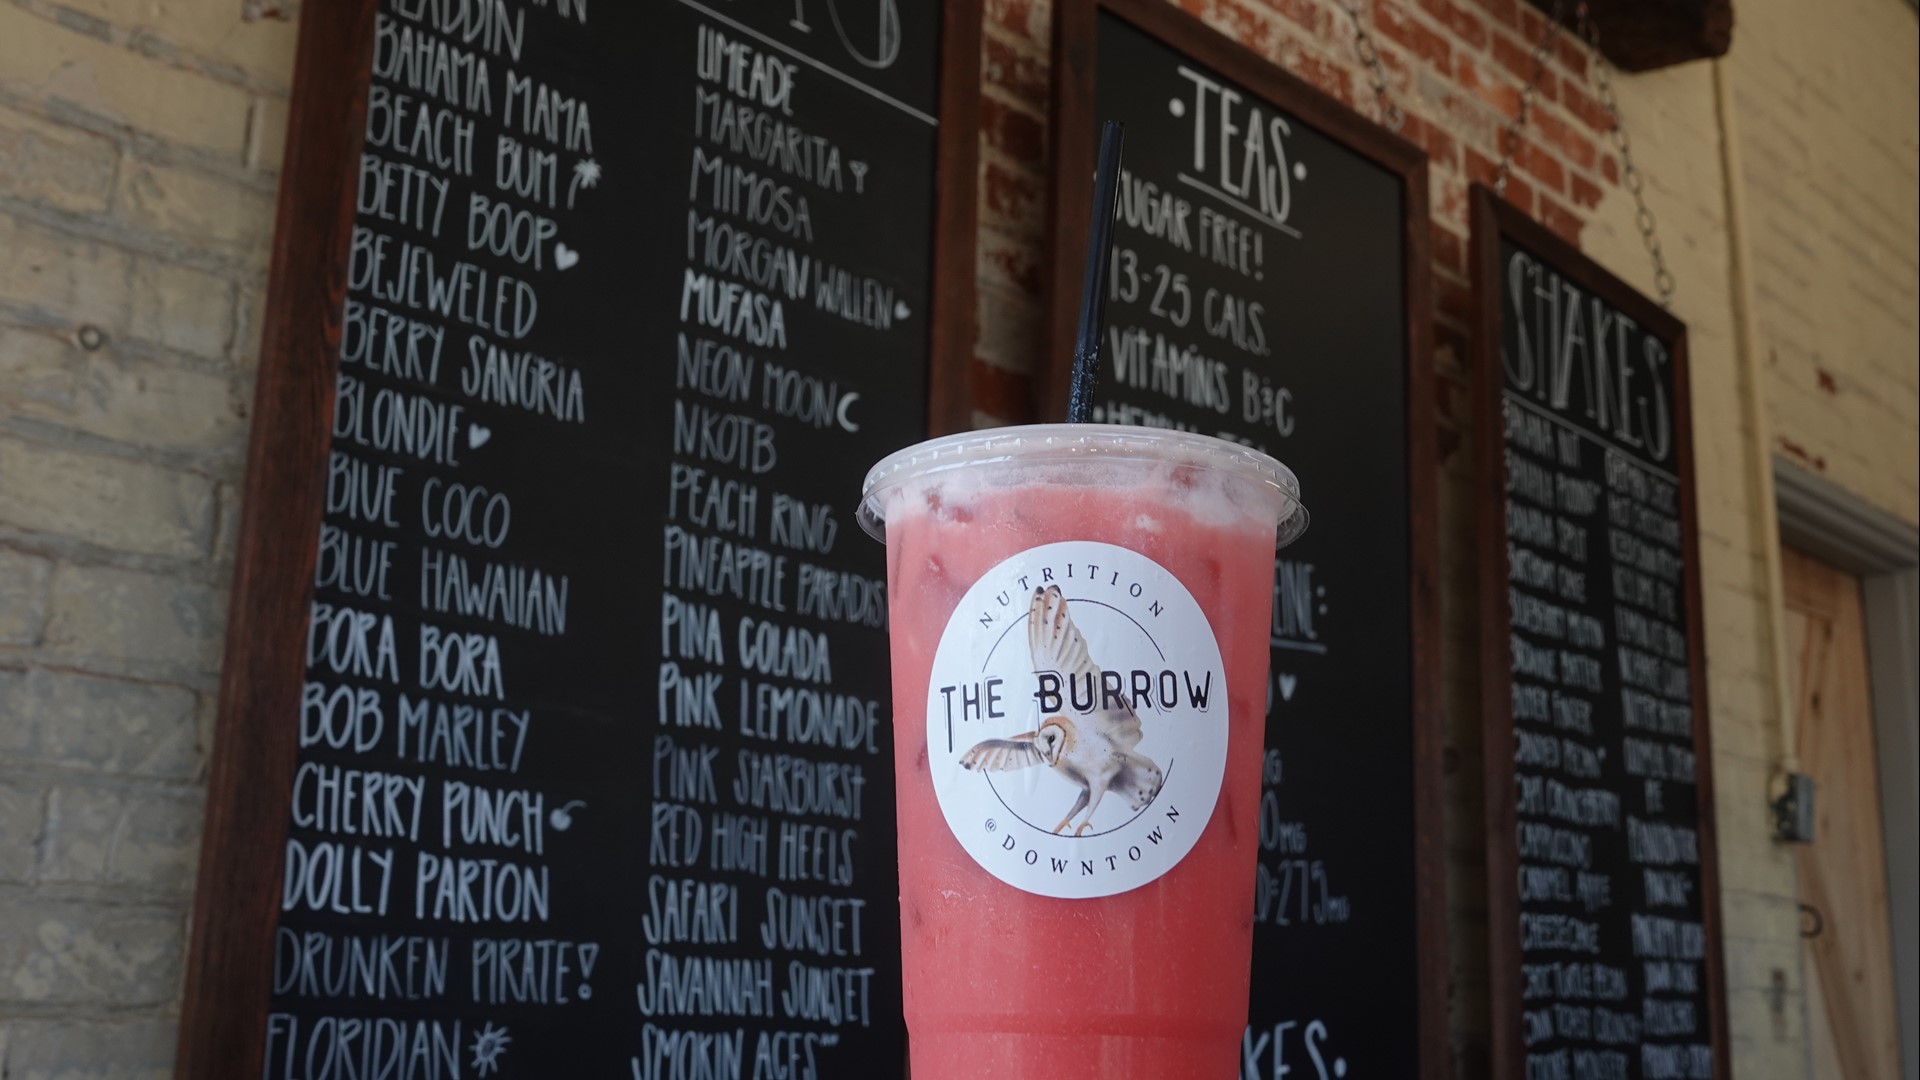 The Burrow offers serval options, like loaded teas, protein shakes, iced coffee, and specialty drinks.